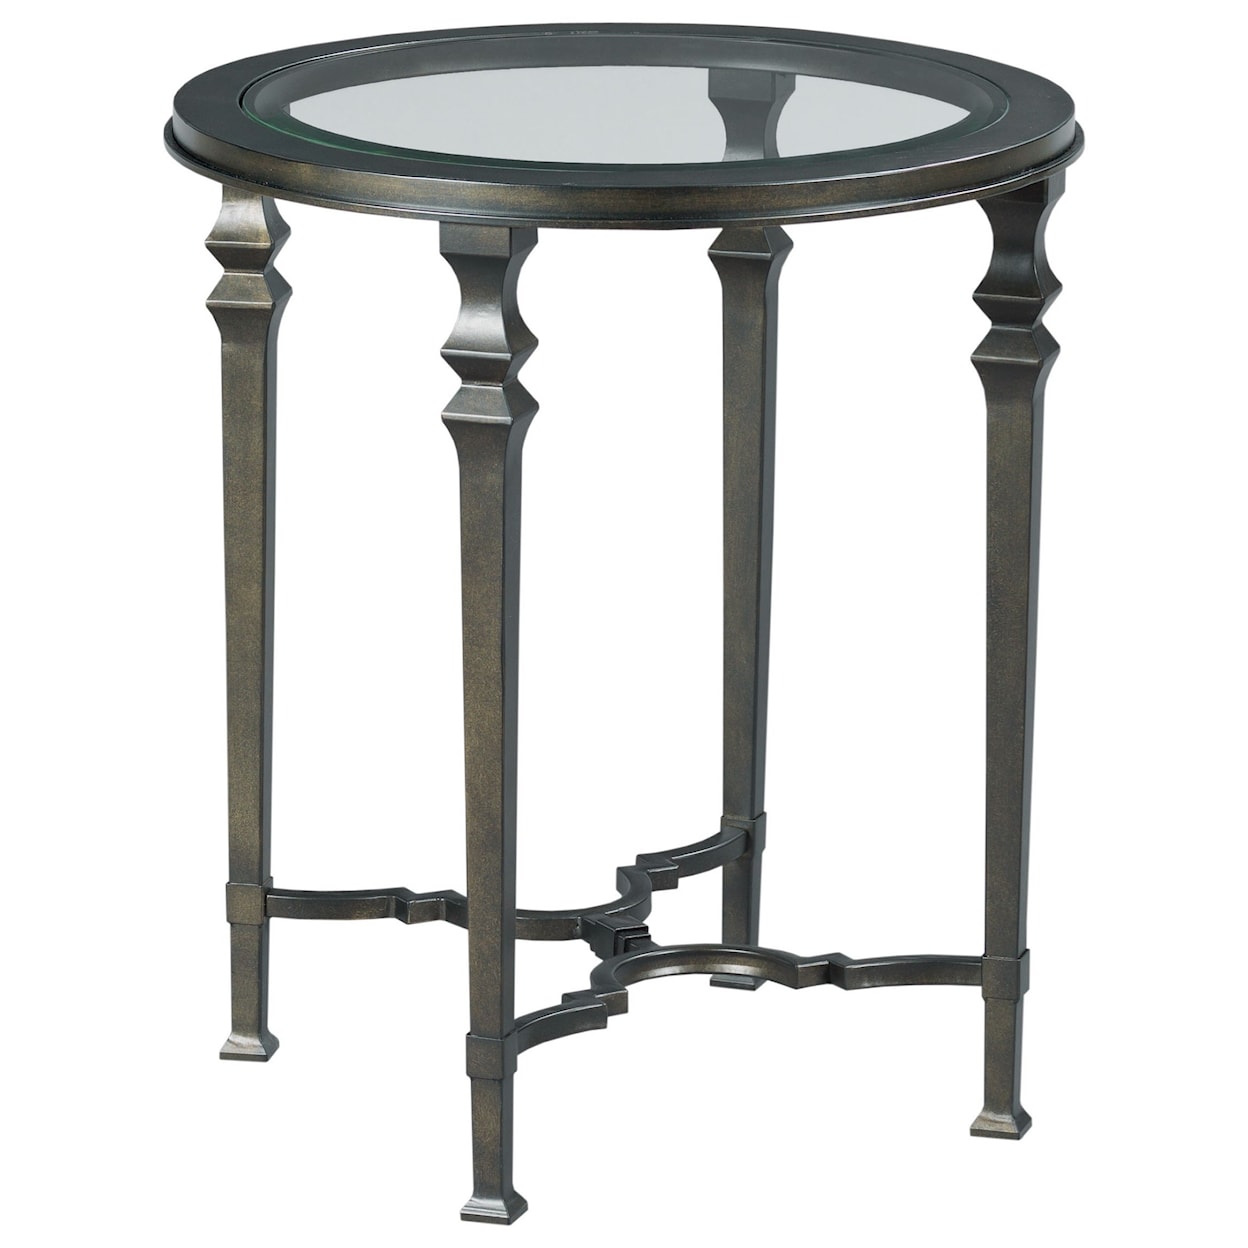 Hammary Paragon Round End Table